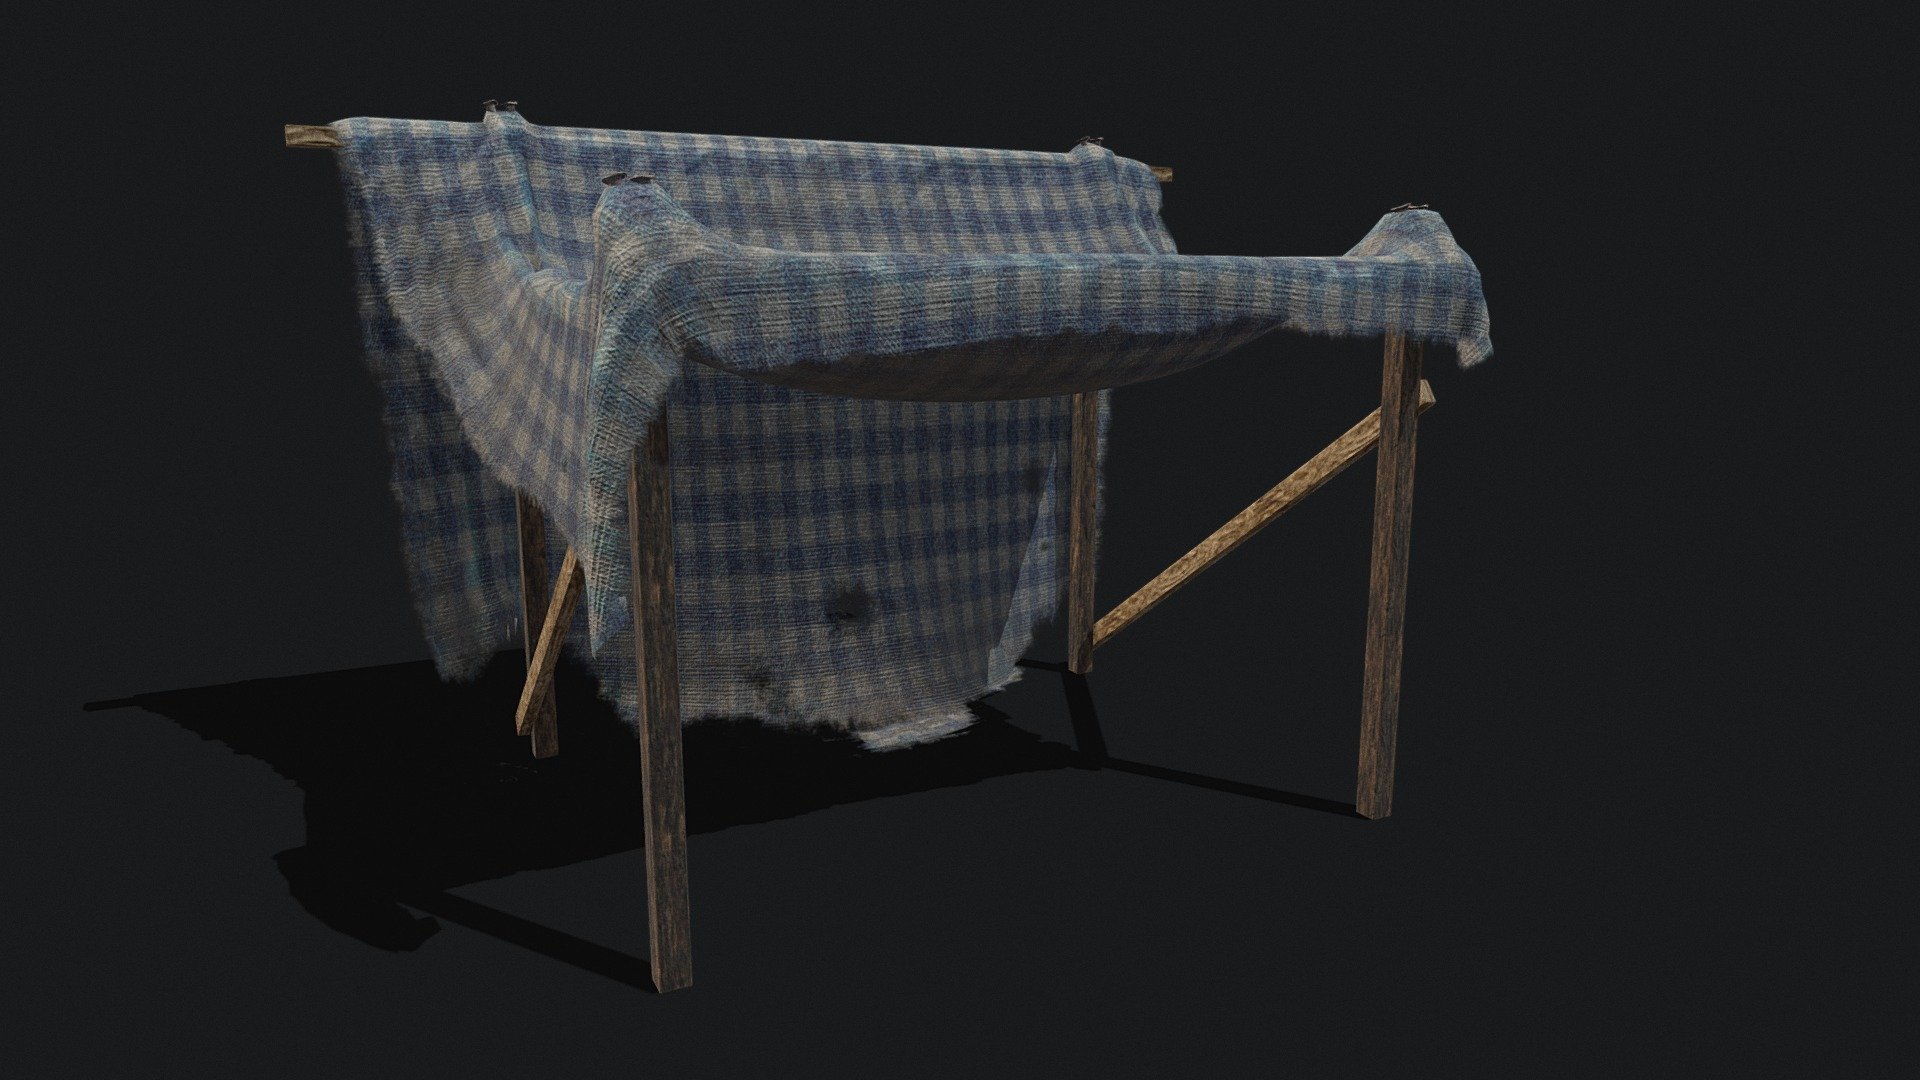 Medieval Style Tent 3D Model PBR Texture available in 4096 x 4096 - Medieval_Shop_Tent - Buy Royalty Free 3D model by GetDeadEntertainment 3d model